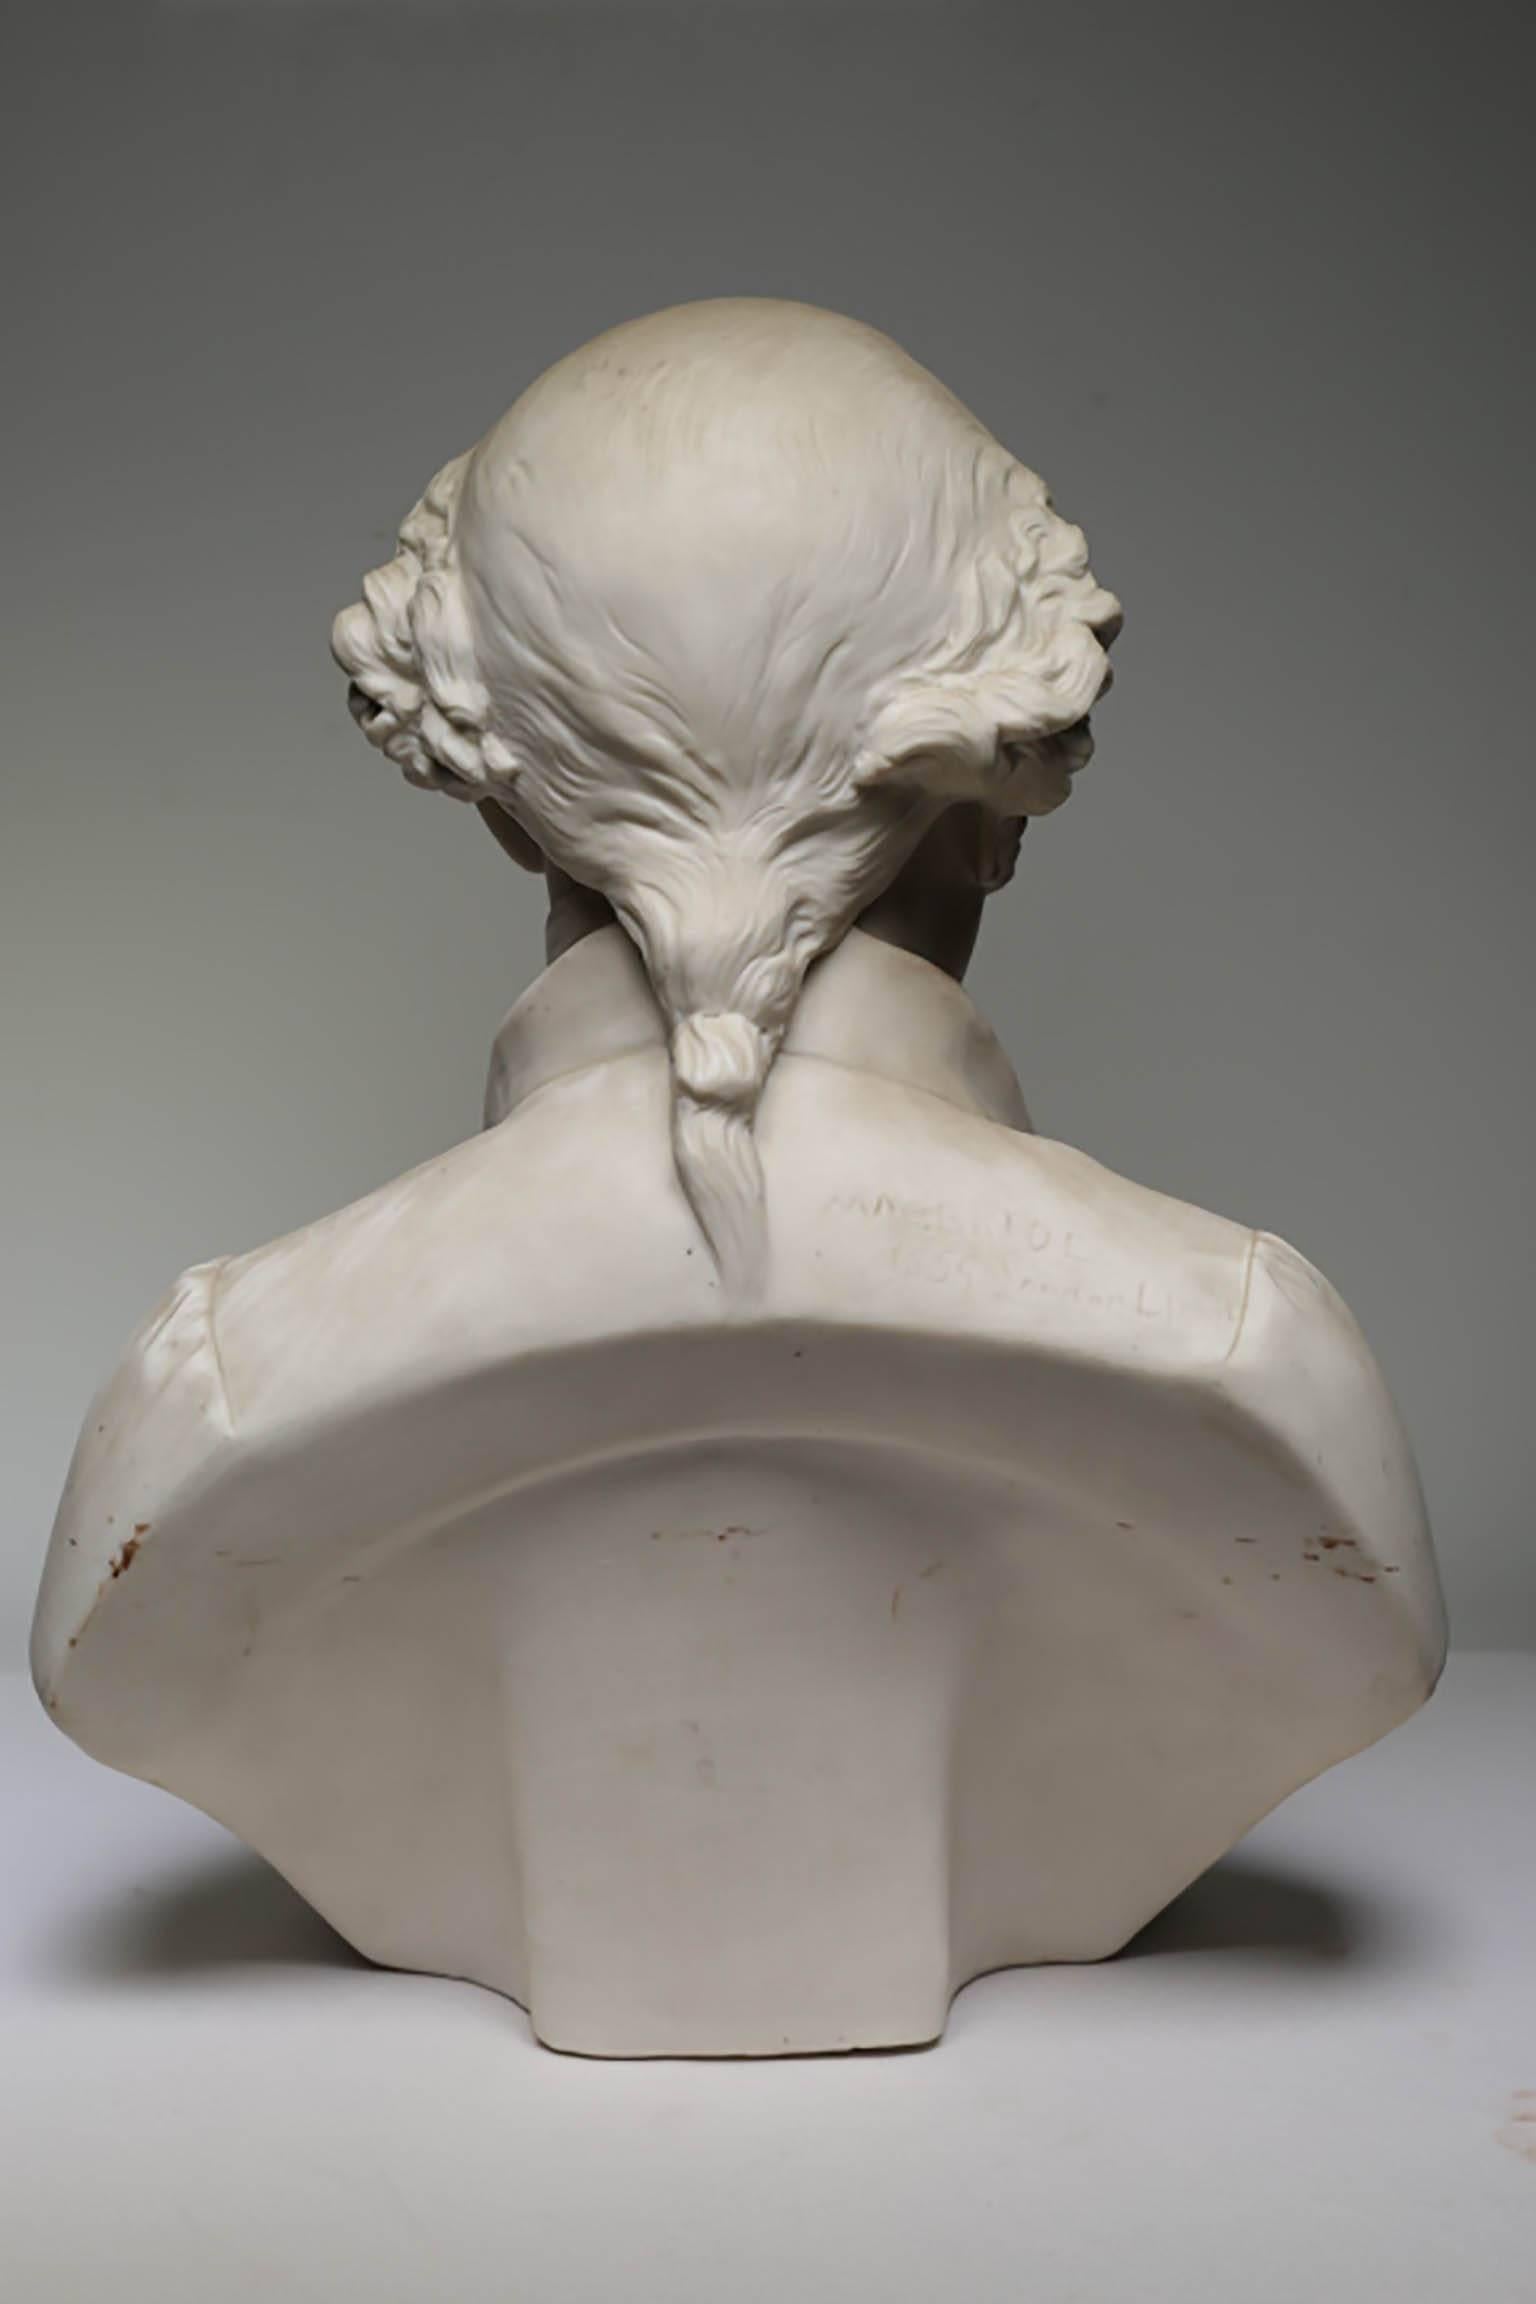 Victorian 19th Century Signed Bisque Porcelain Bust Made in London, circa 1800s